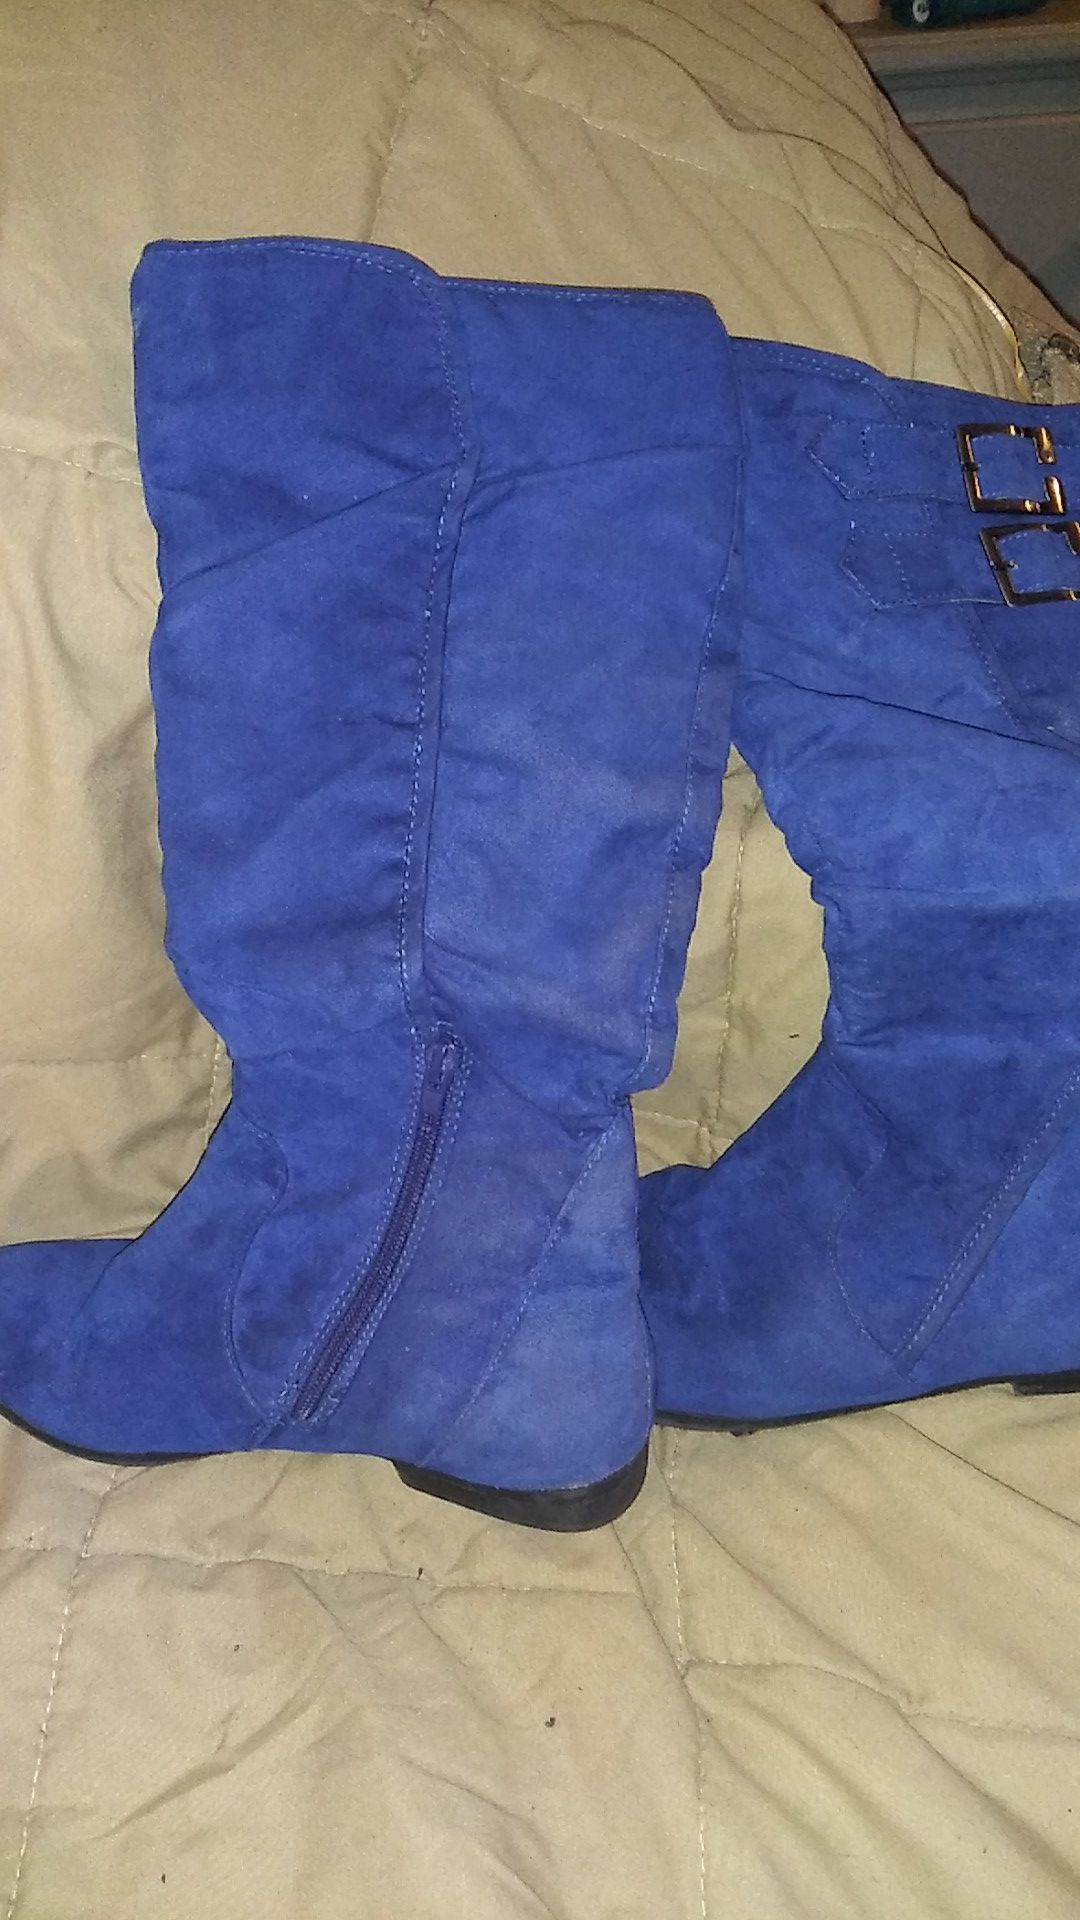 Faux sued blue knee high boots